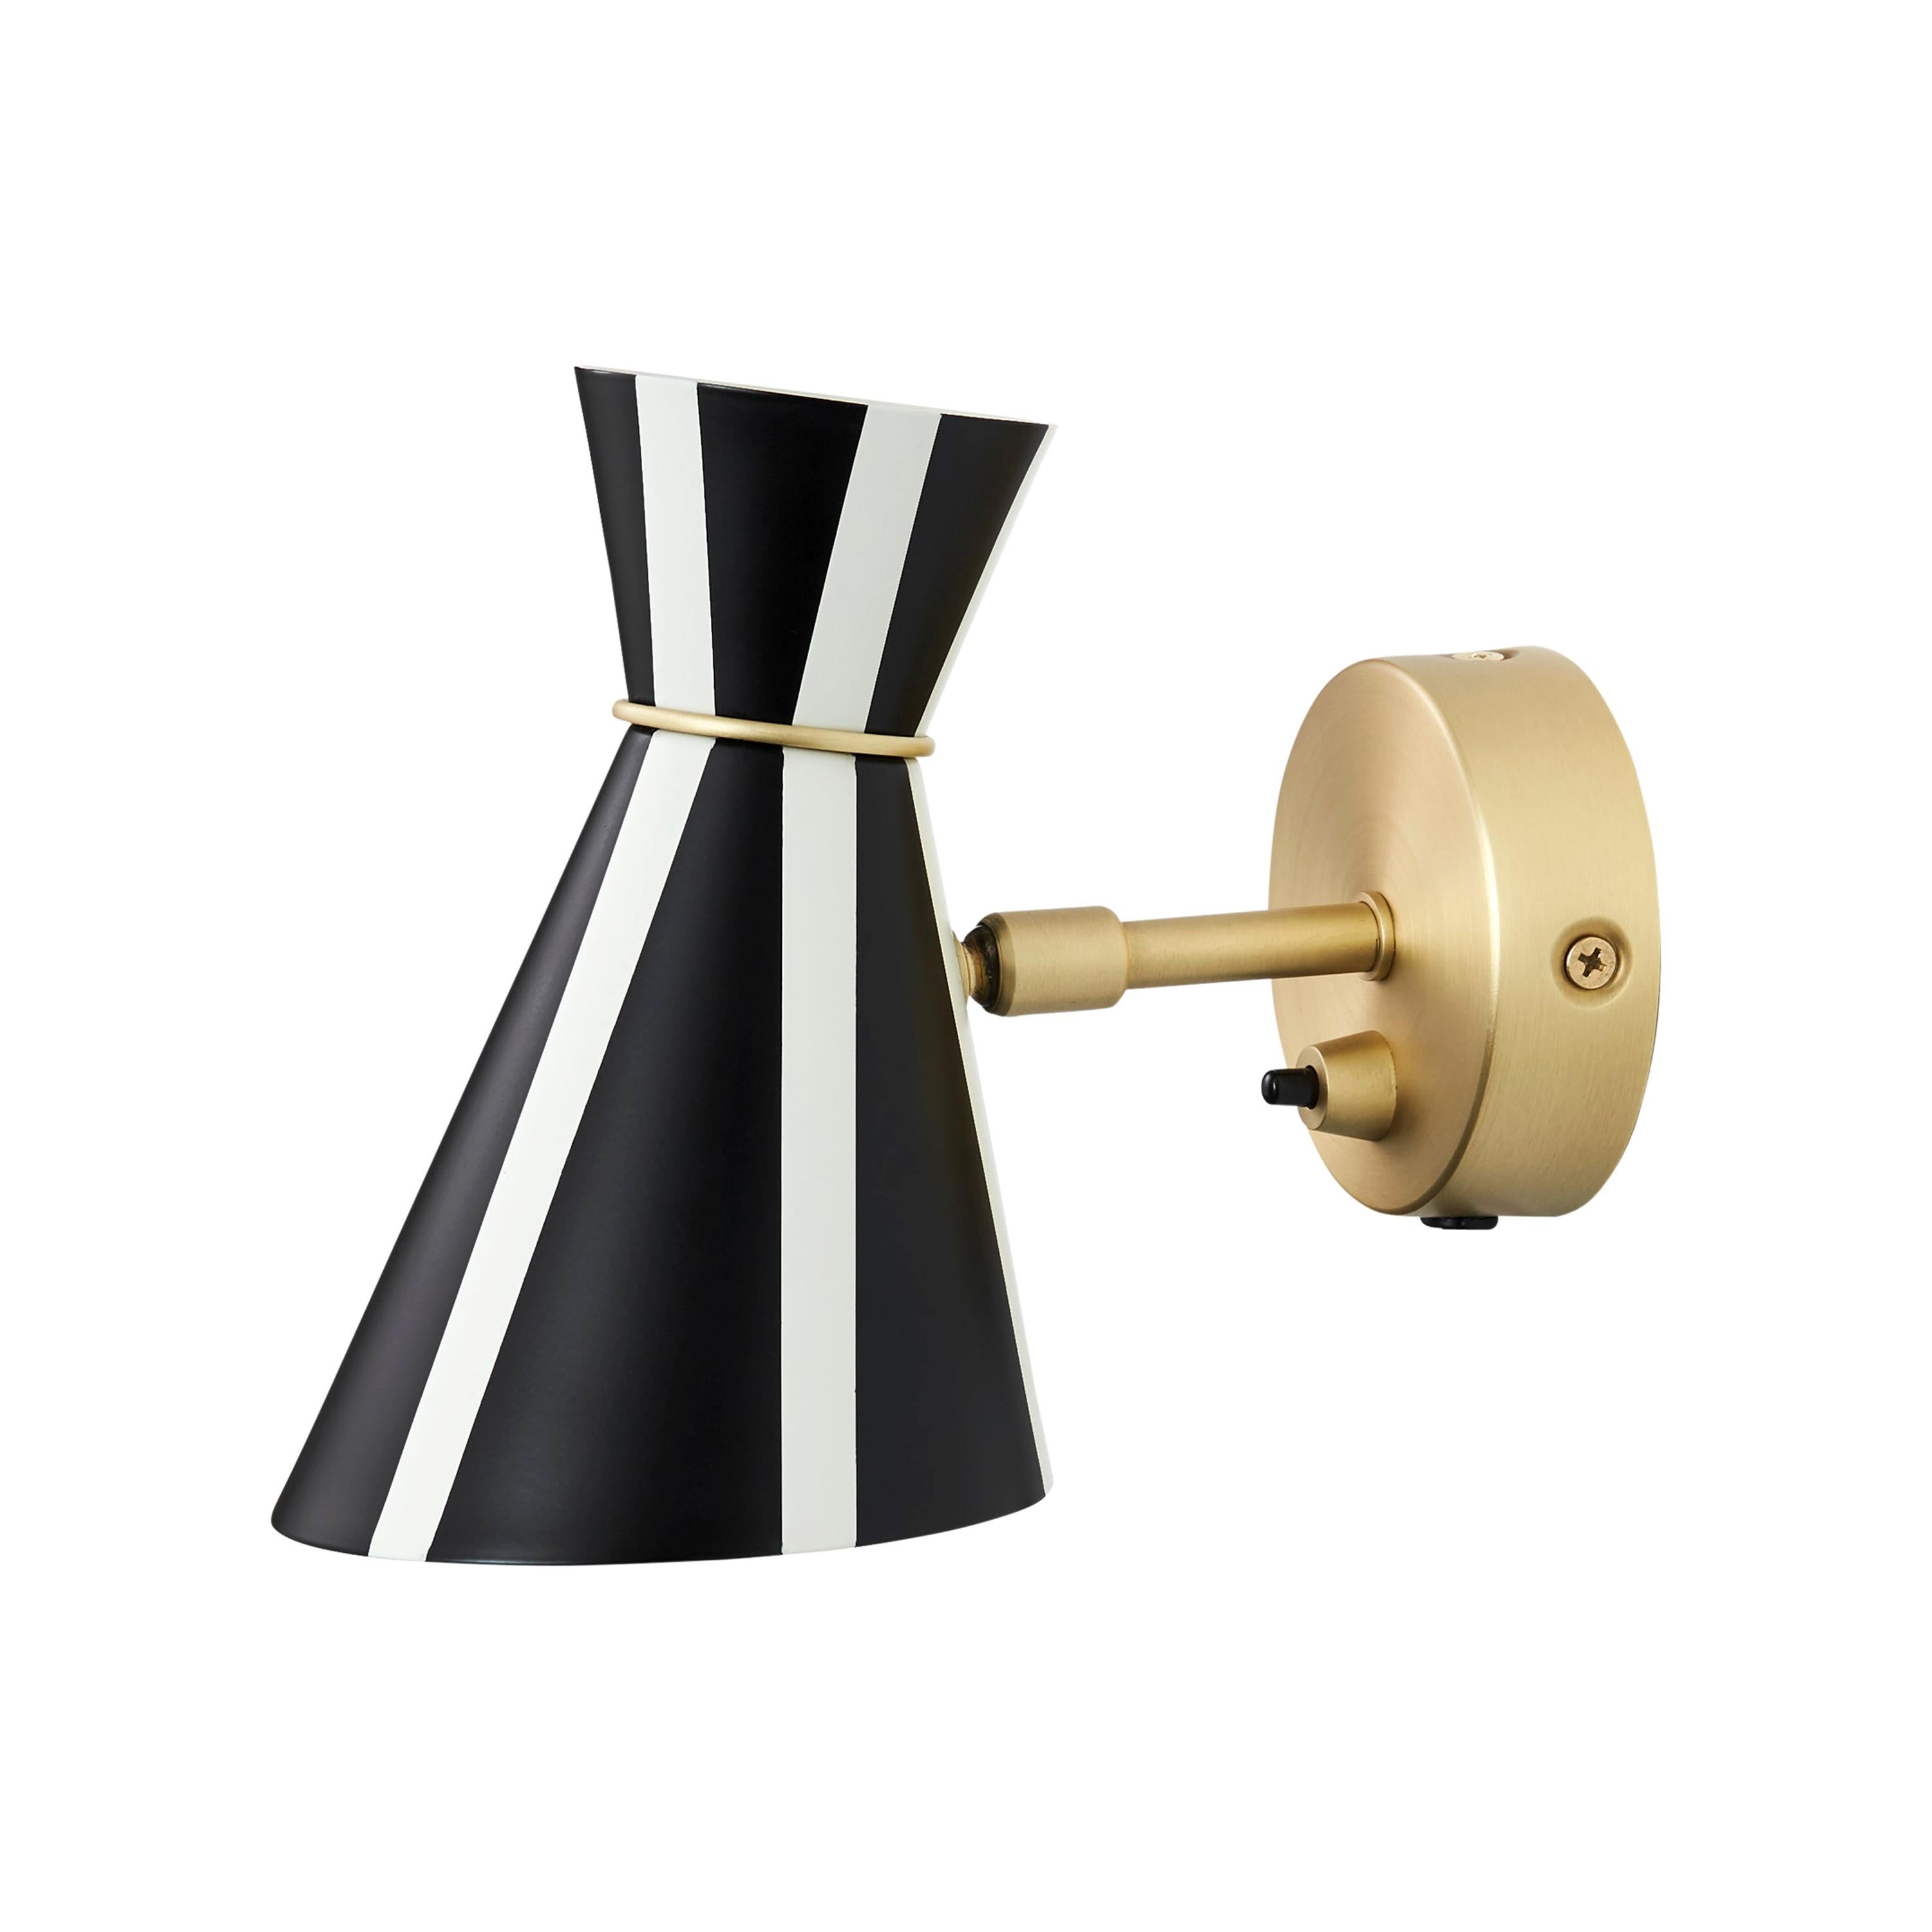 Bloom Stripe Wall Lamp in Black Noir and Warm White by Svend Aage Holm-Sørensen For Sale